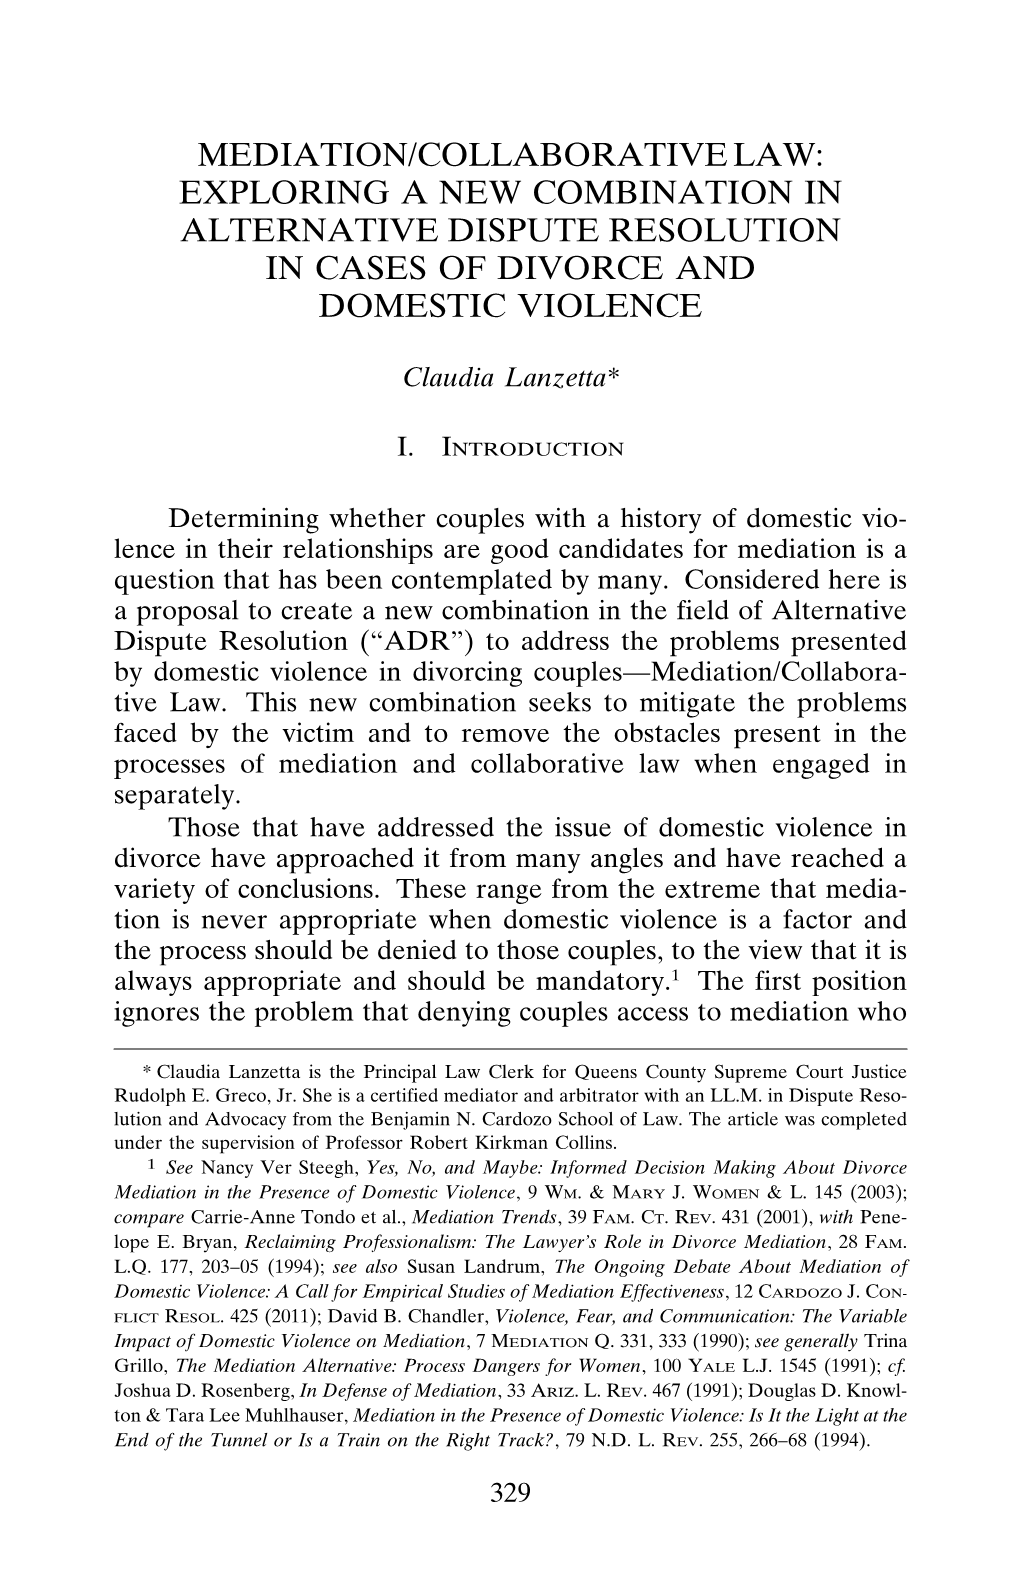 Mediation/Collaborative Law: Exploring a New Combination in Alternative Dispute Resolution in Cases of Divorce and Domestic Violence